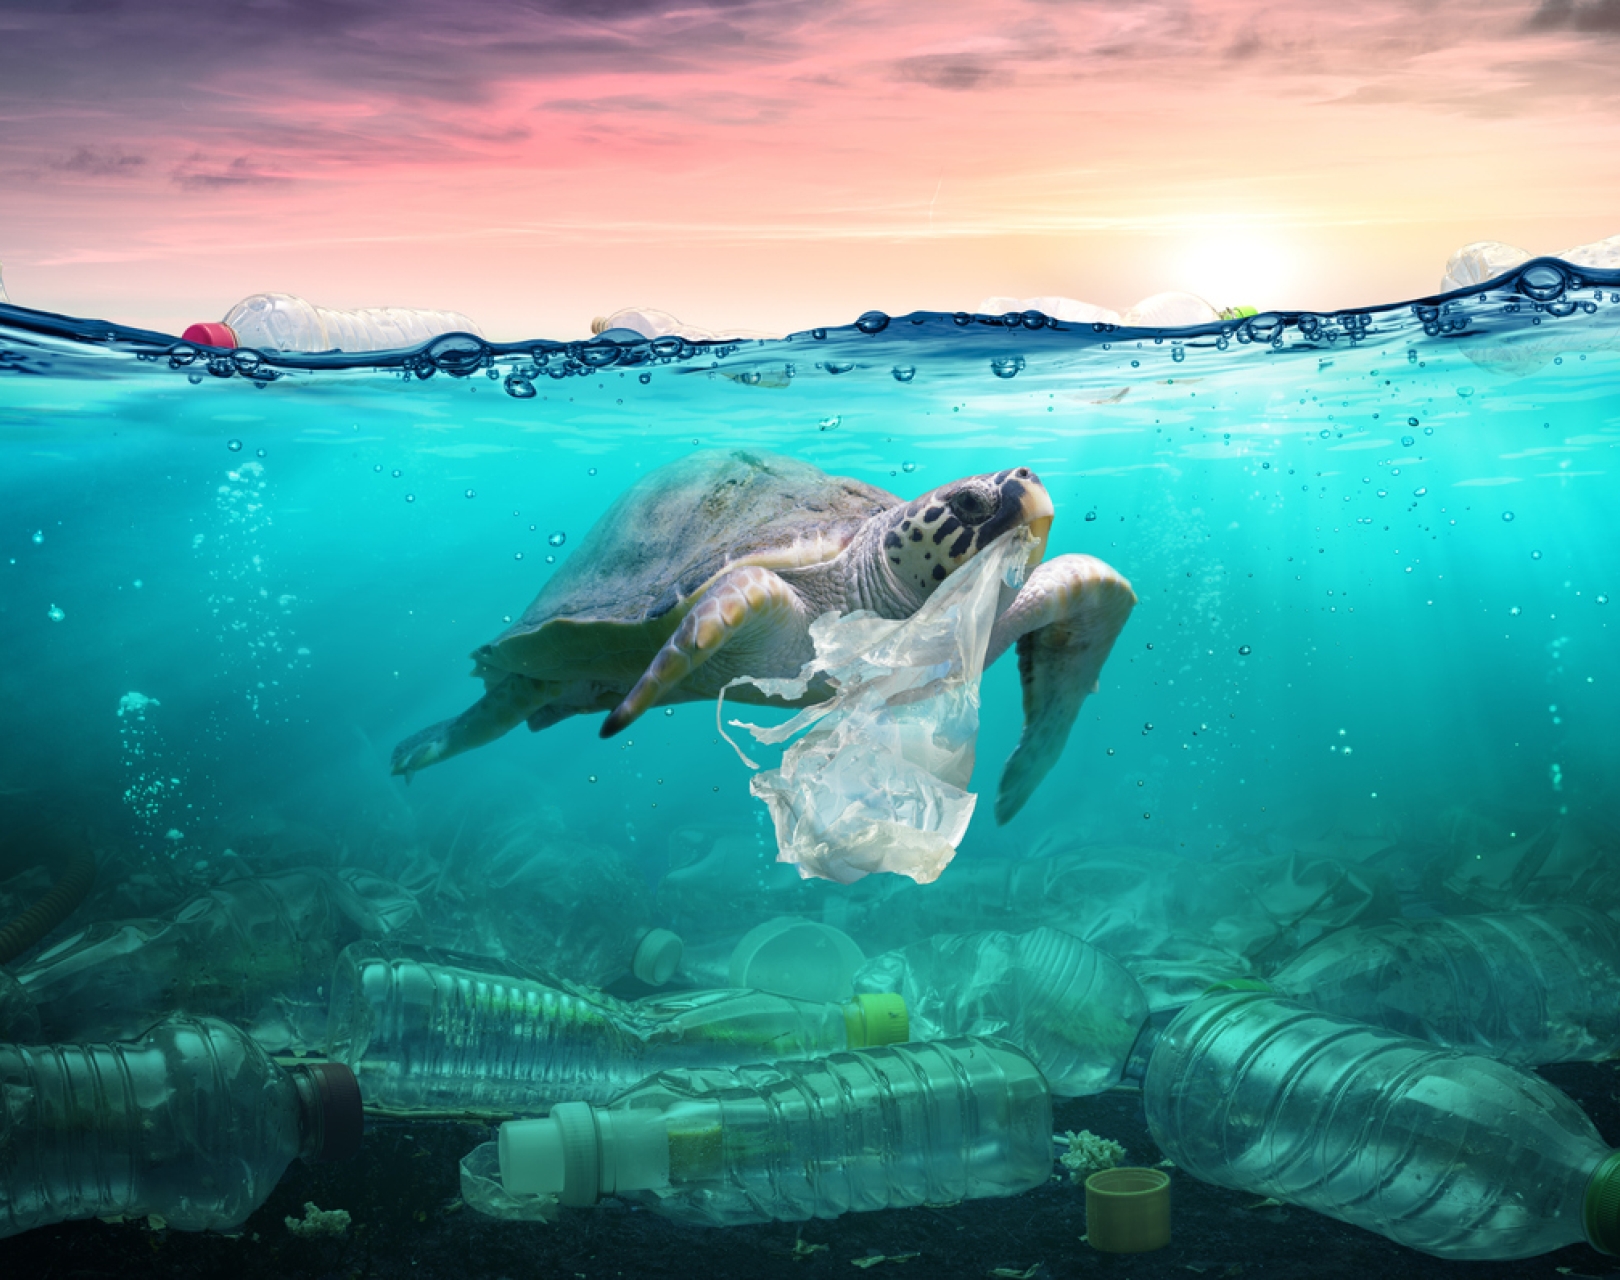 Computer generated image of a turtle with a plastic bag in its mouth, swimming in a turquoise shallow sea littered with plastic bottles on the seabed and surface. The sky is pink with yellow and purple hues.